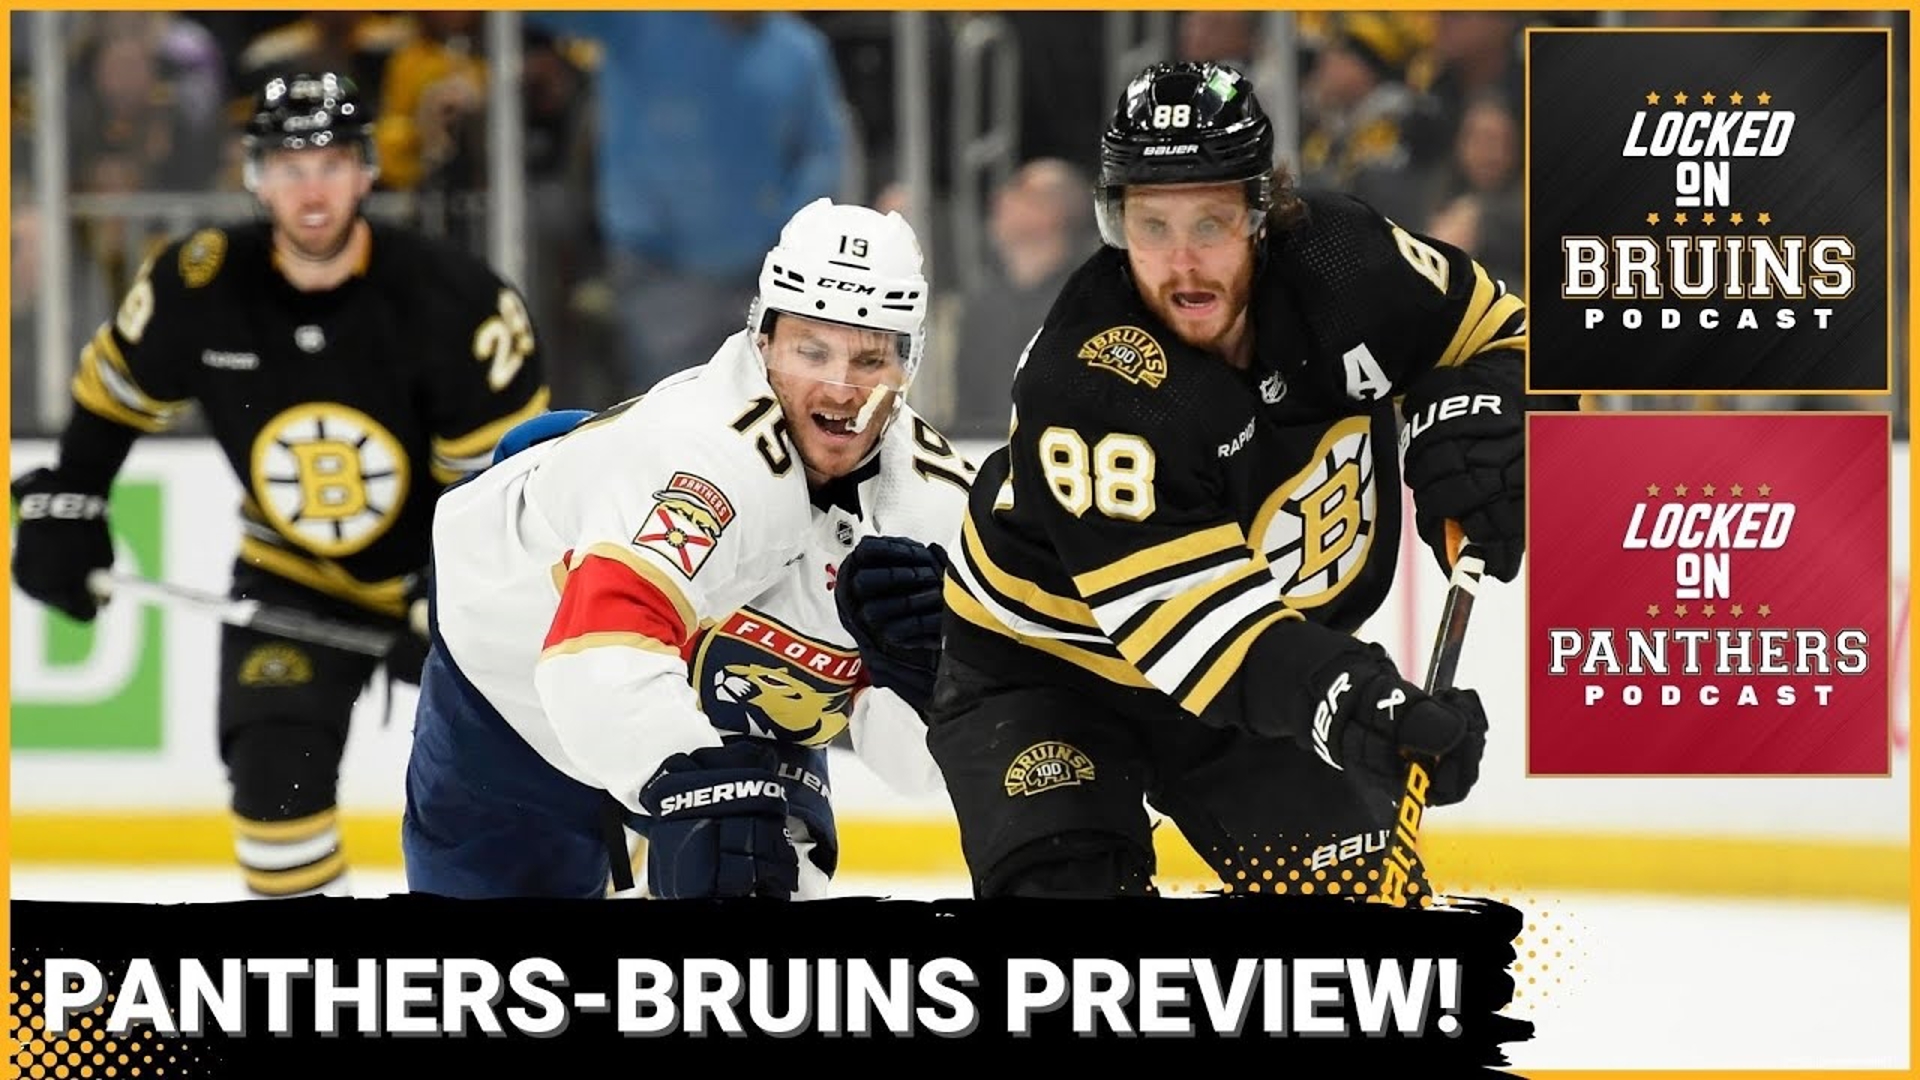 For the second year in a row, we have a playoff series between the Boston Bruins and the Florida Panthers.